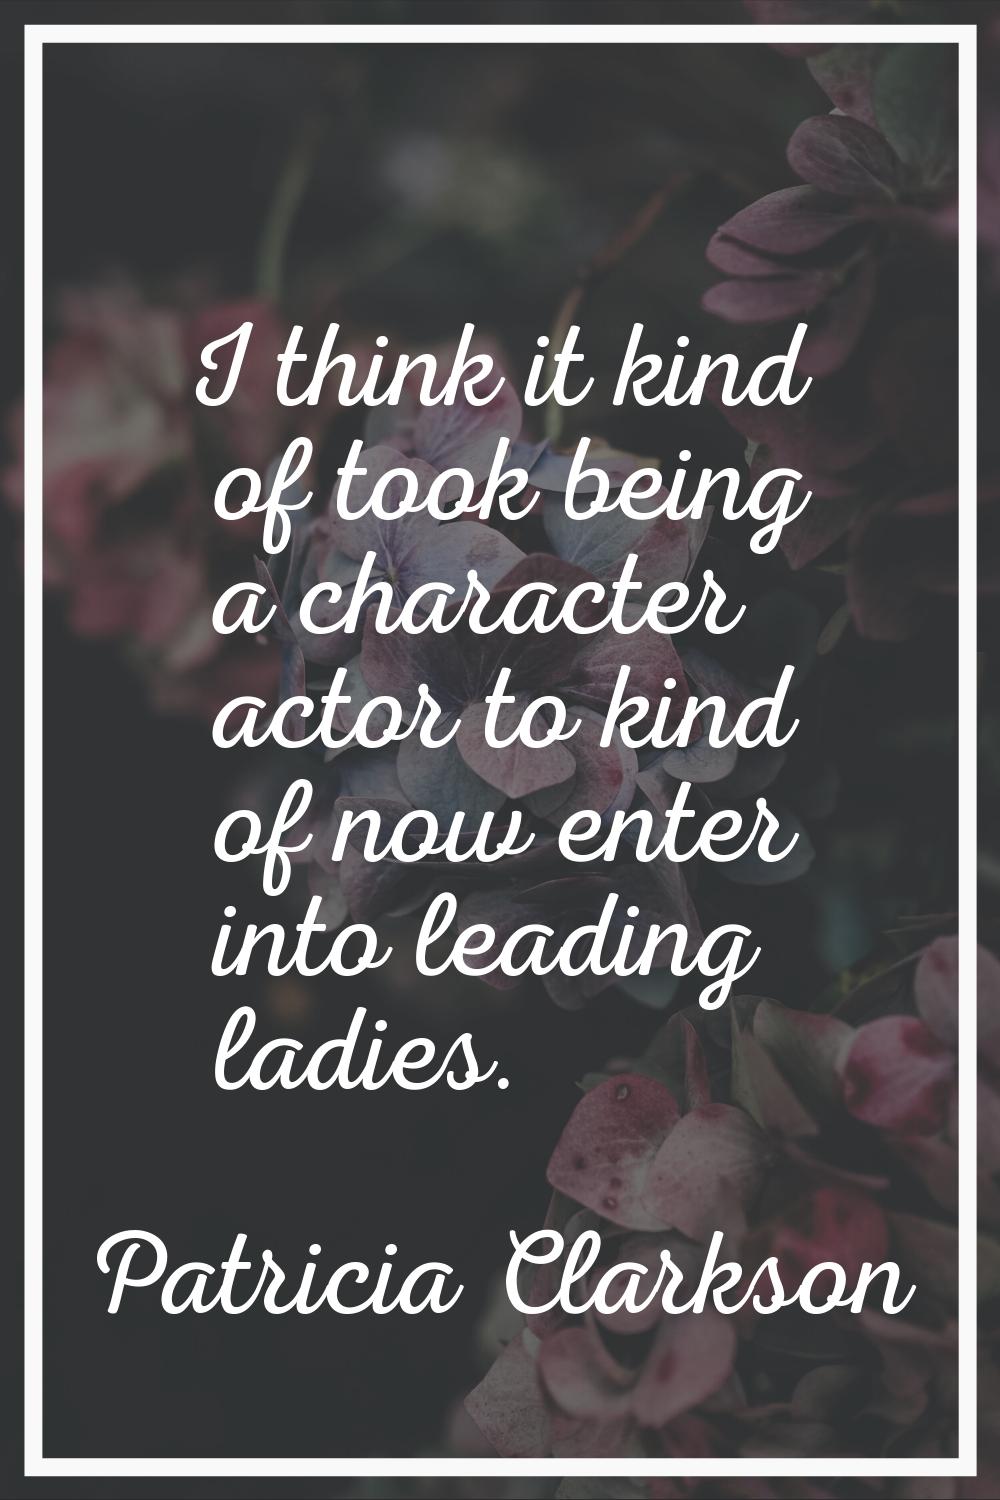 I think it kind of took being a character actor to kind of now enter into leading ladies.